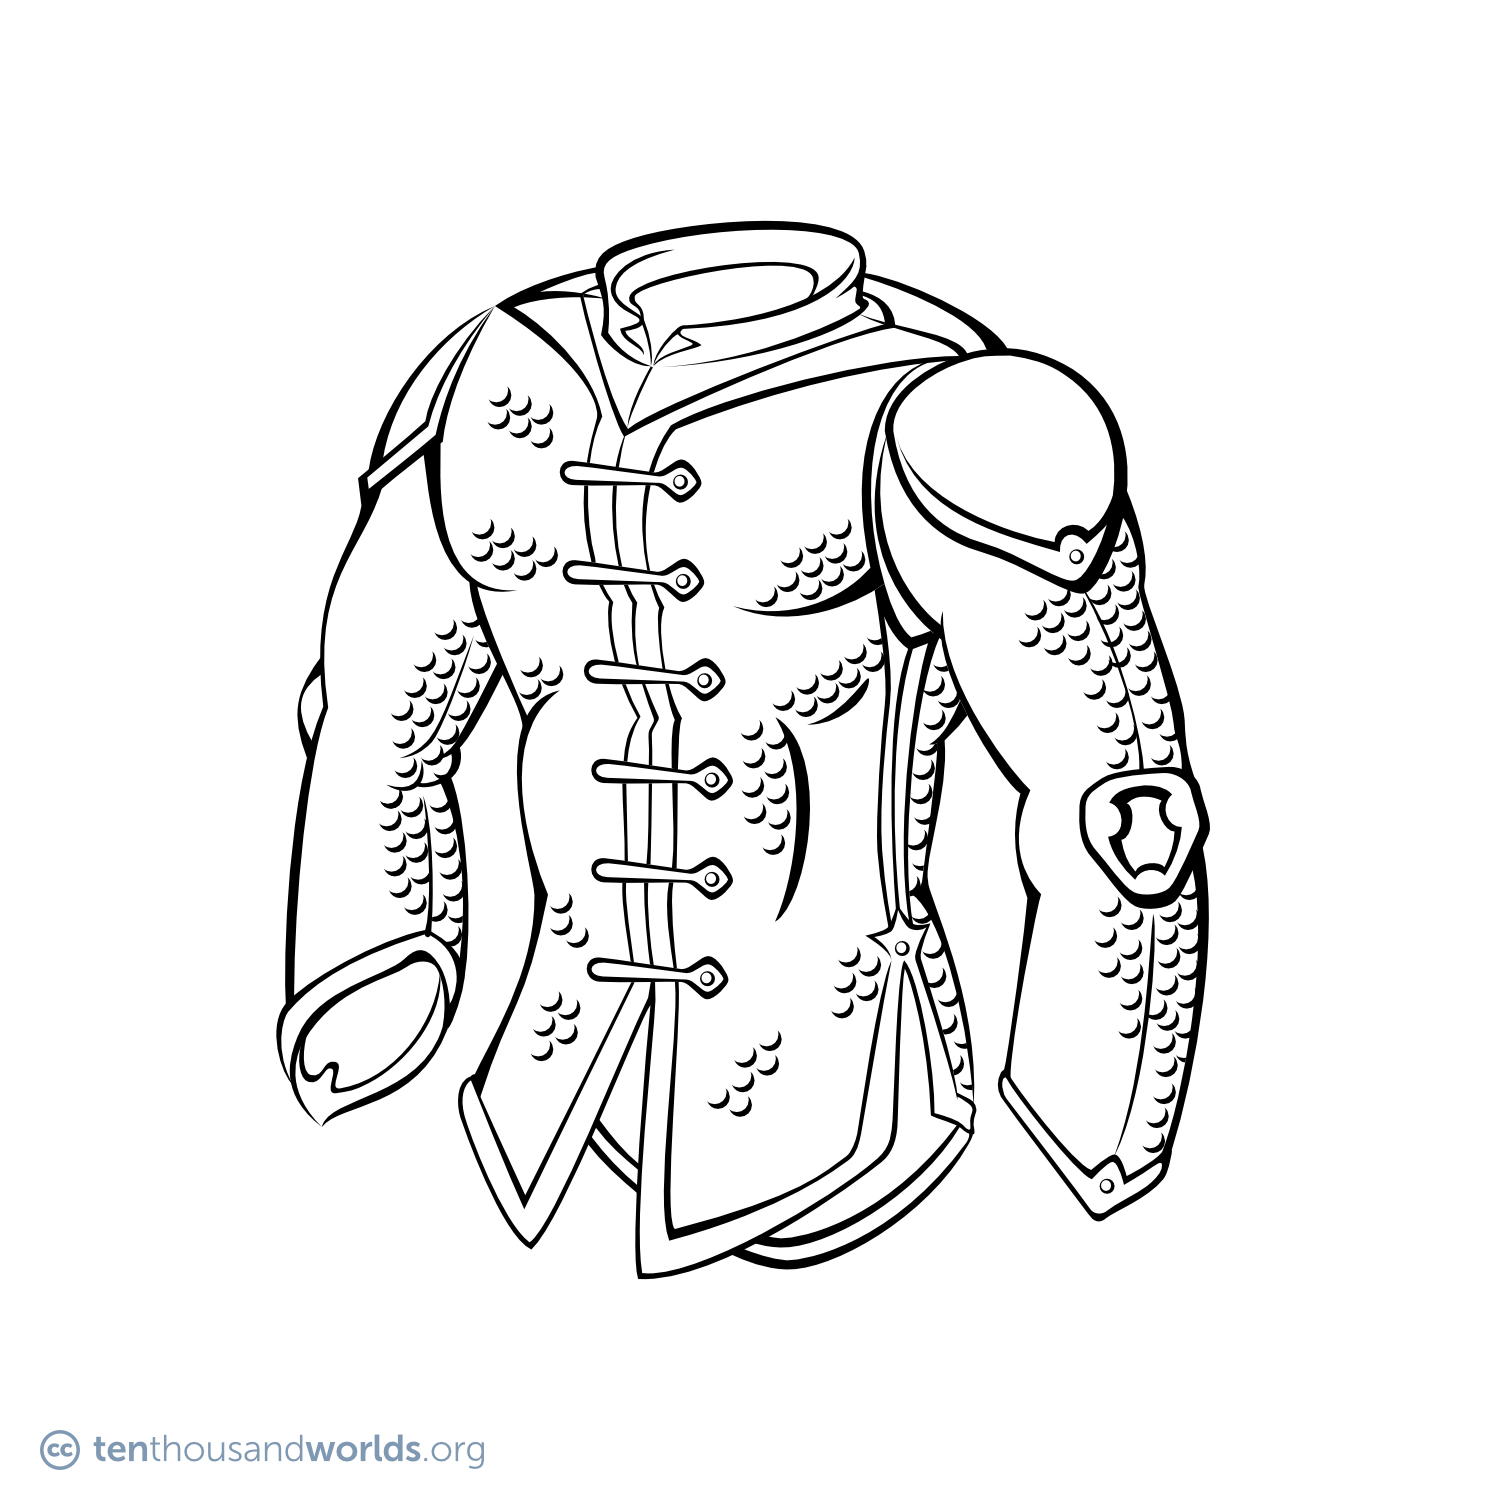 An ink outline of a shirt of scale mail with decorative trim and fasteners, and large metal plates at the shoulders and elbows.